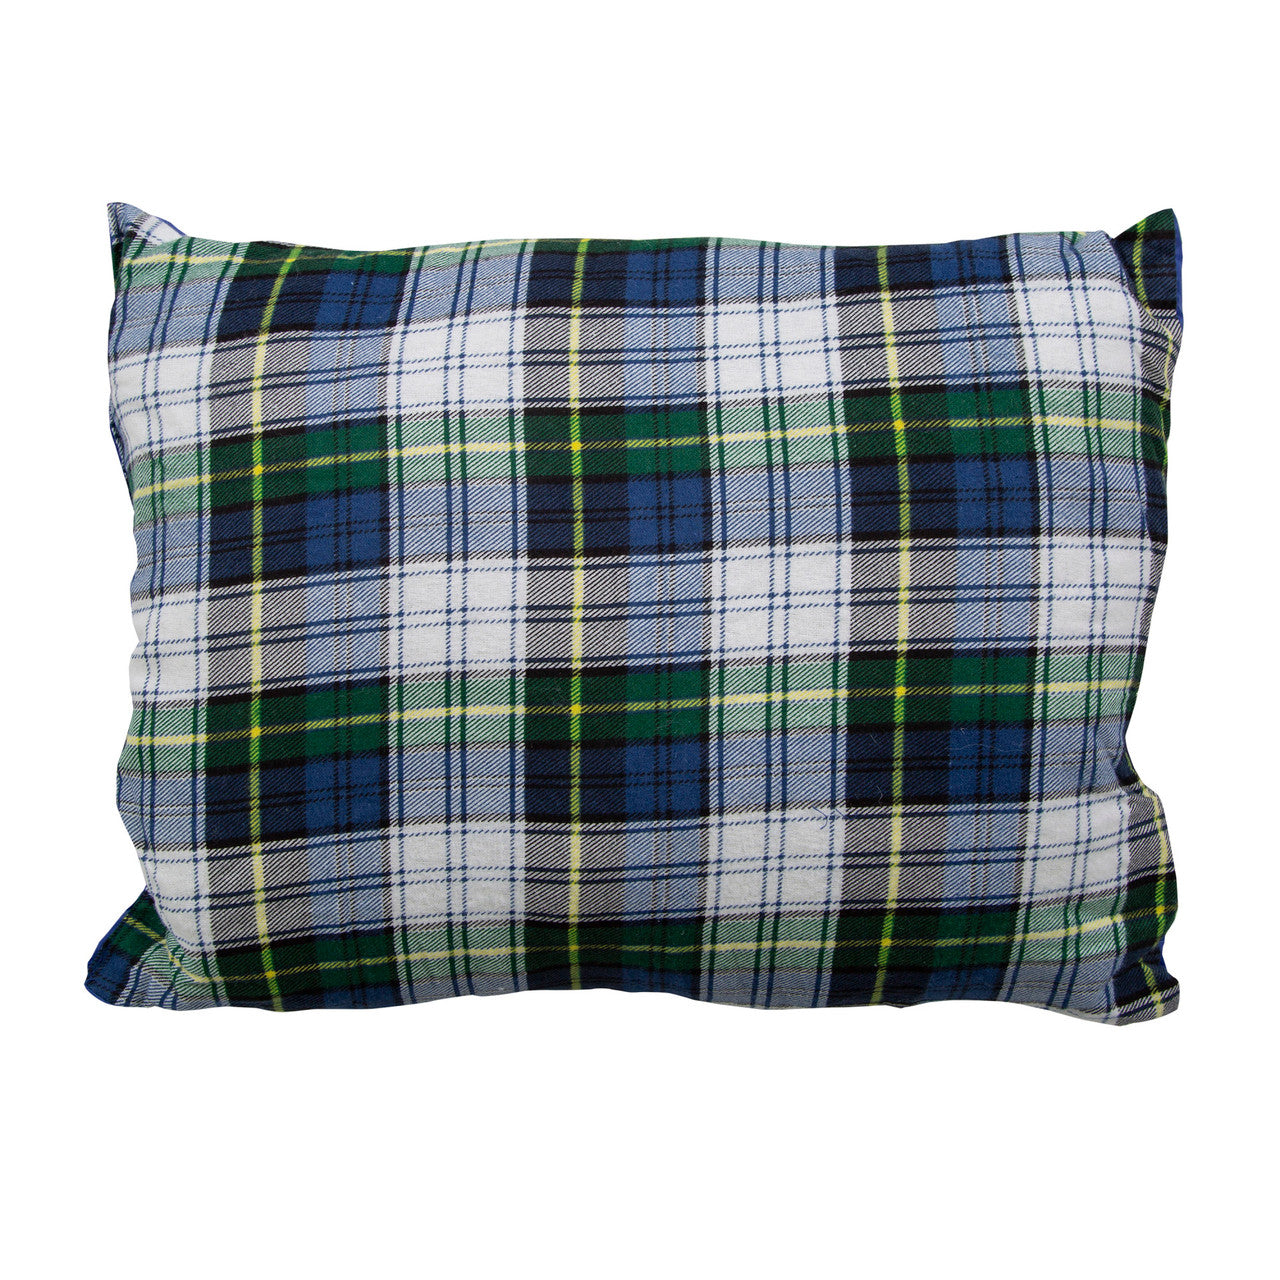 Washable Camp Pillow